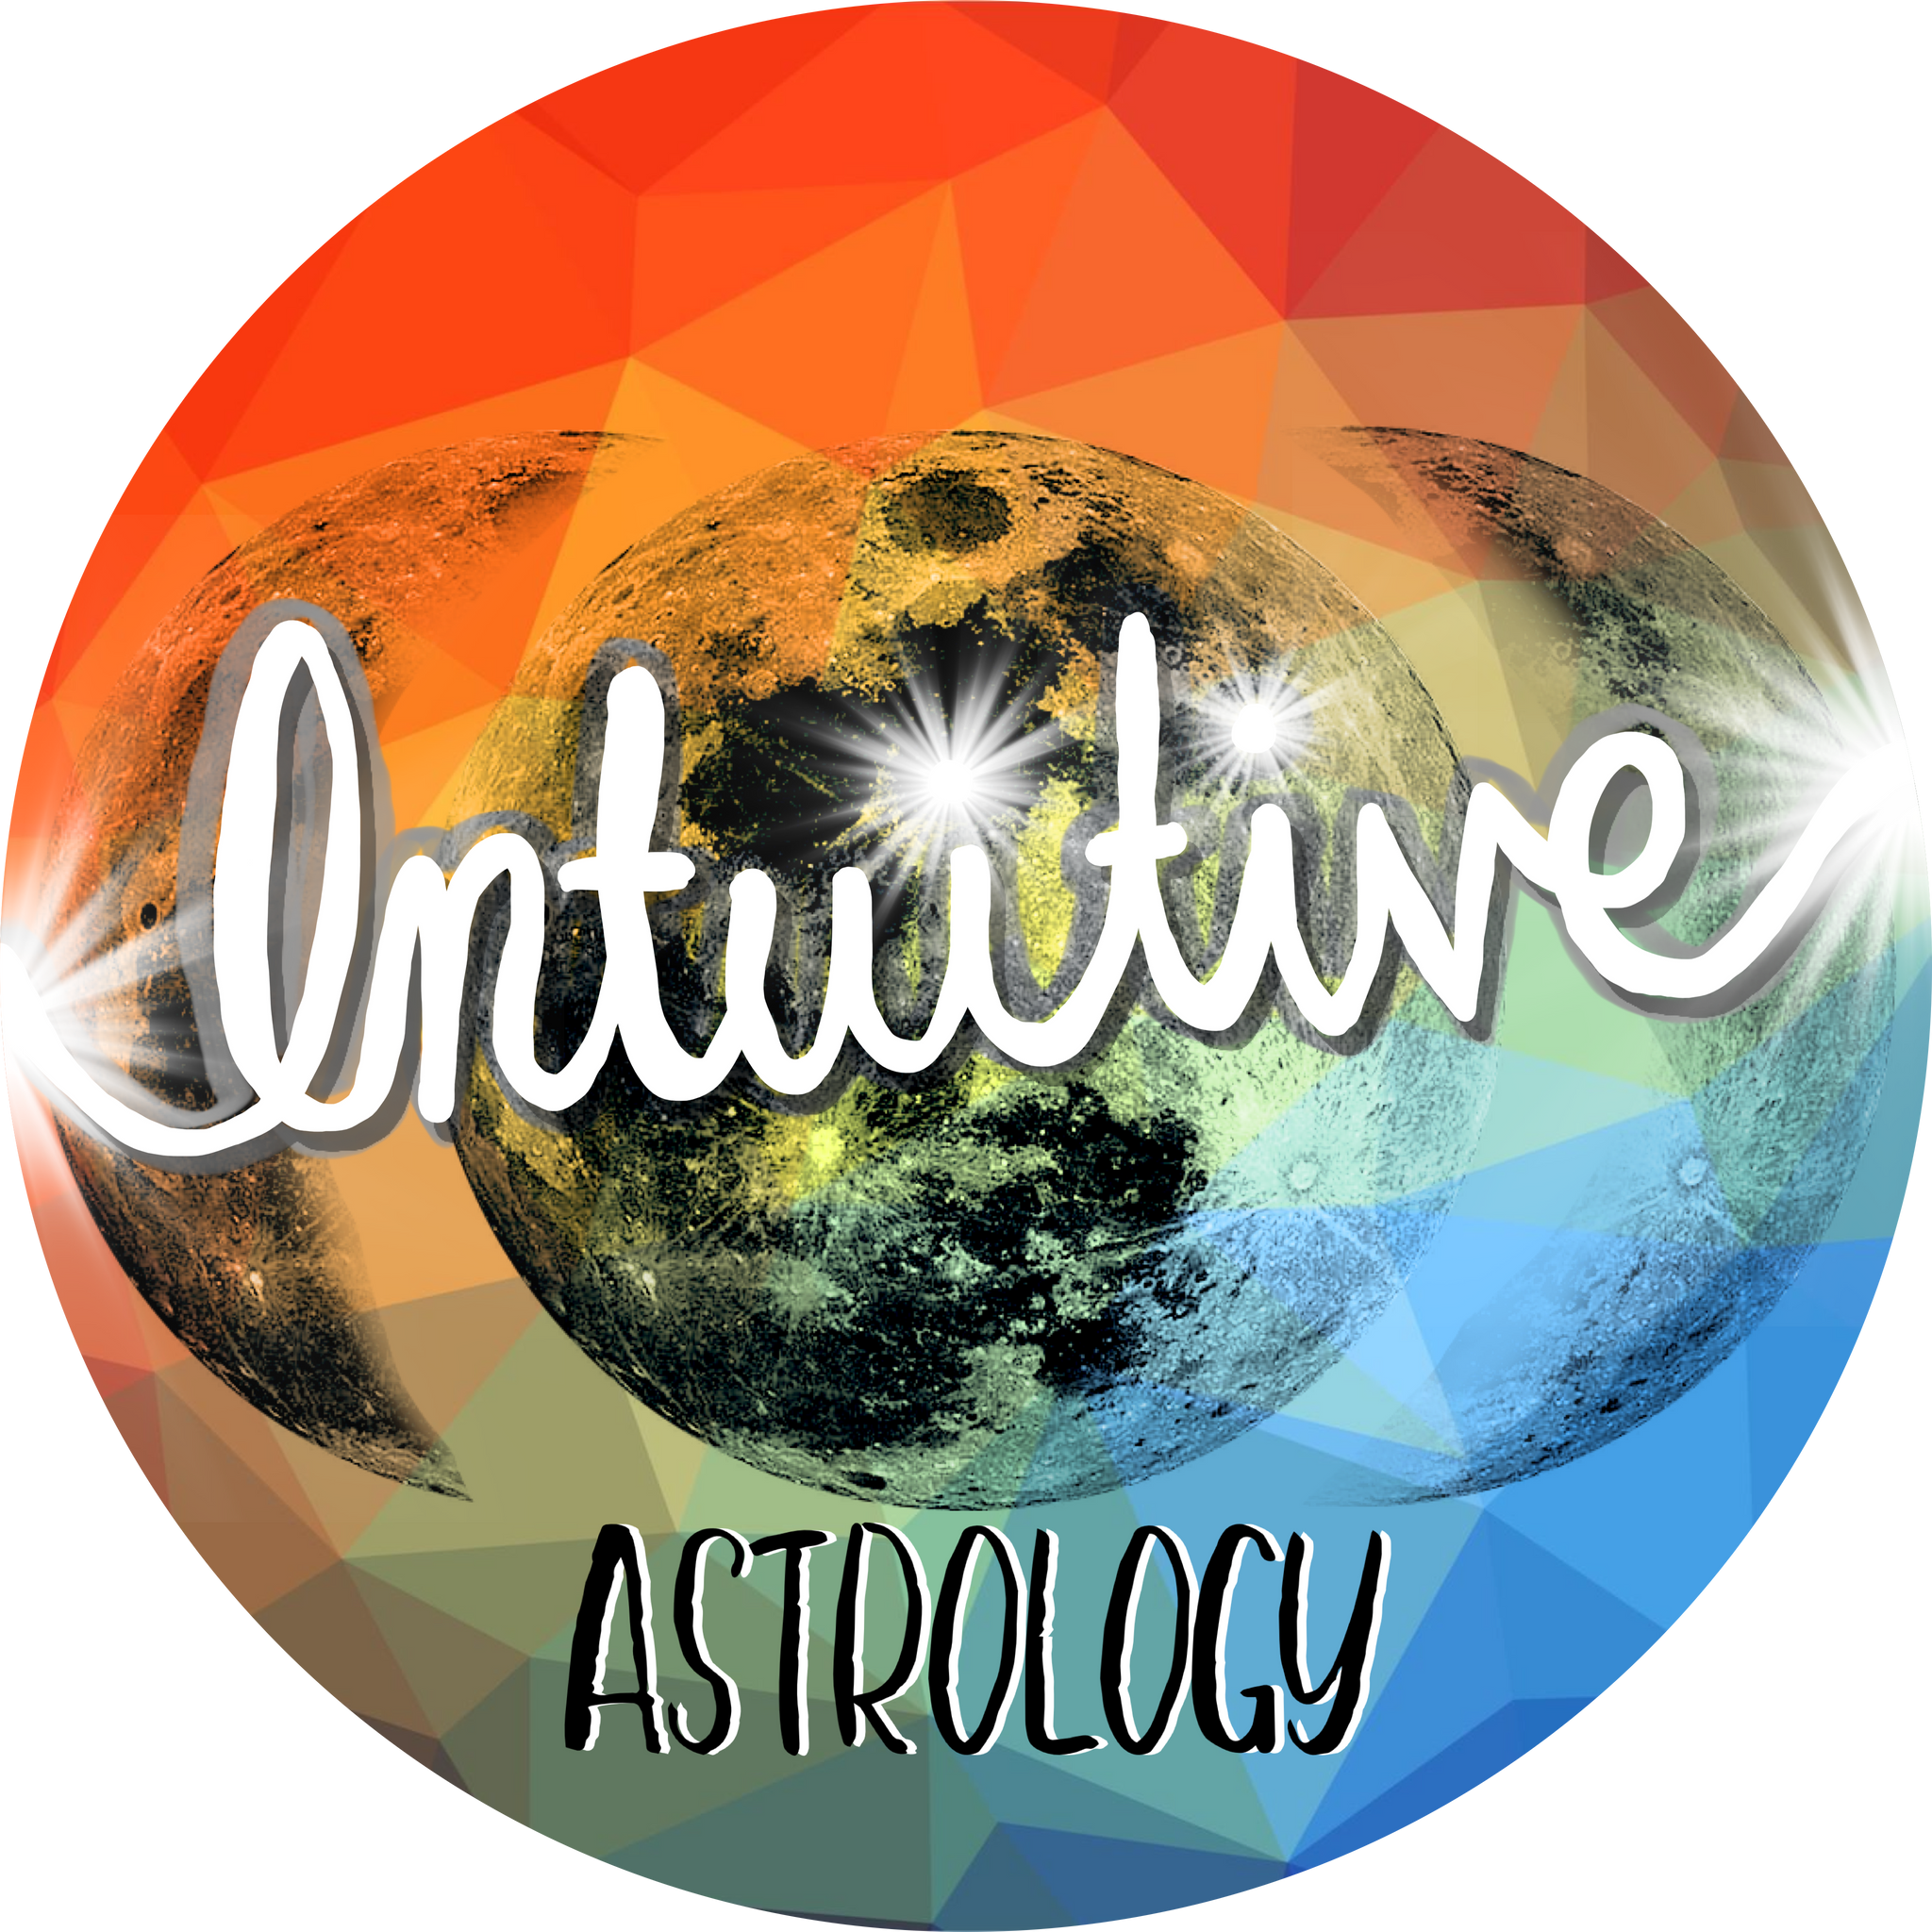 *SPECIAL GIFT/TRADE* | Intuitive Astrology Reading